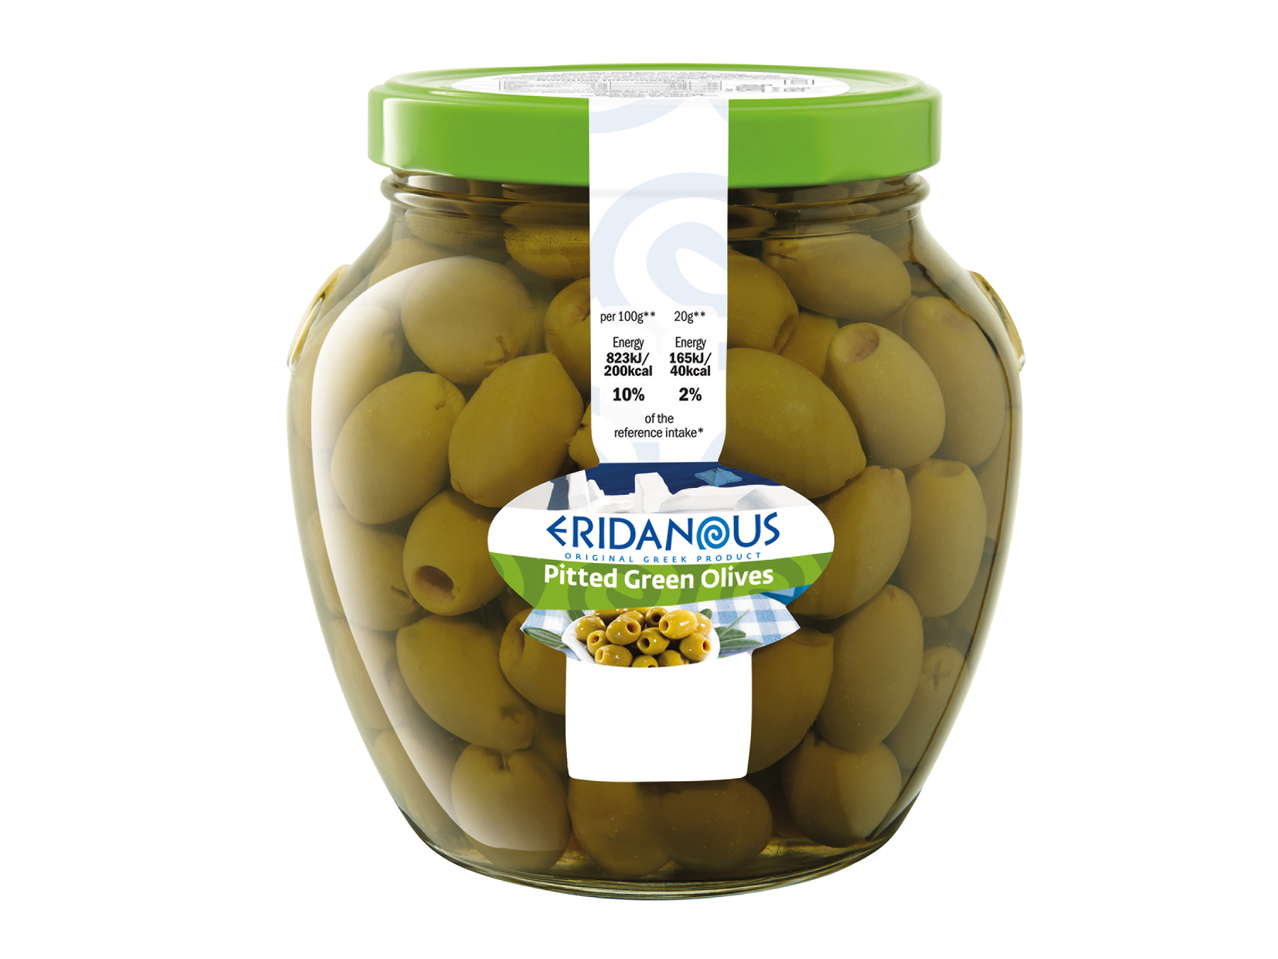 Eridanous Pitted Green Olives in Brine1